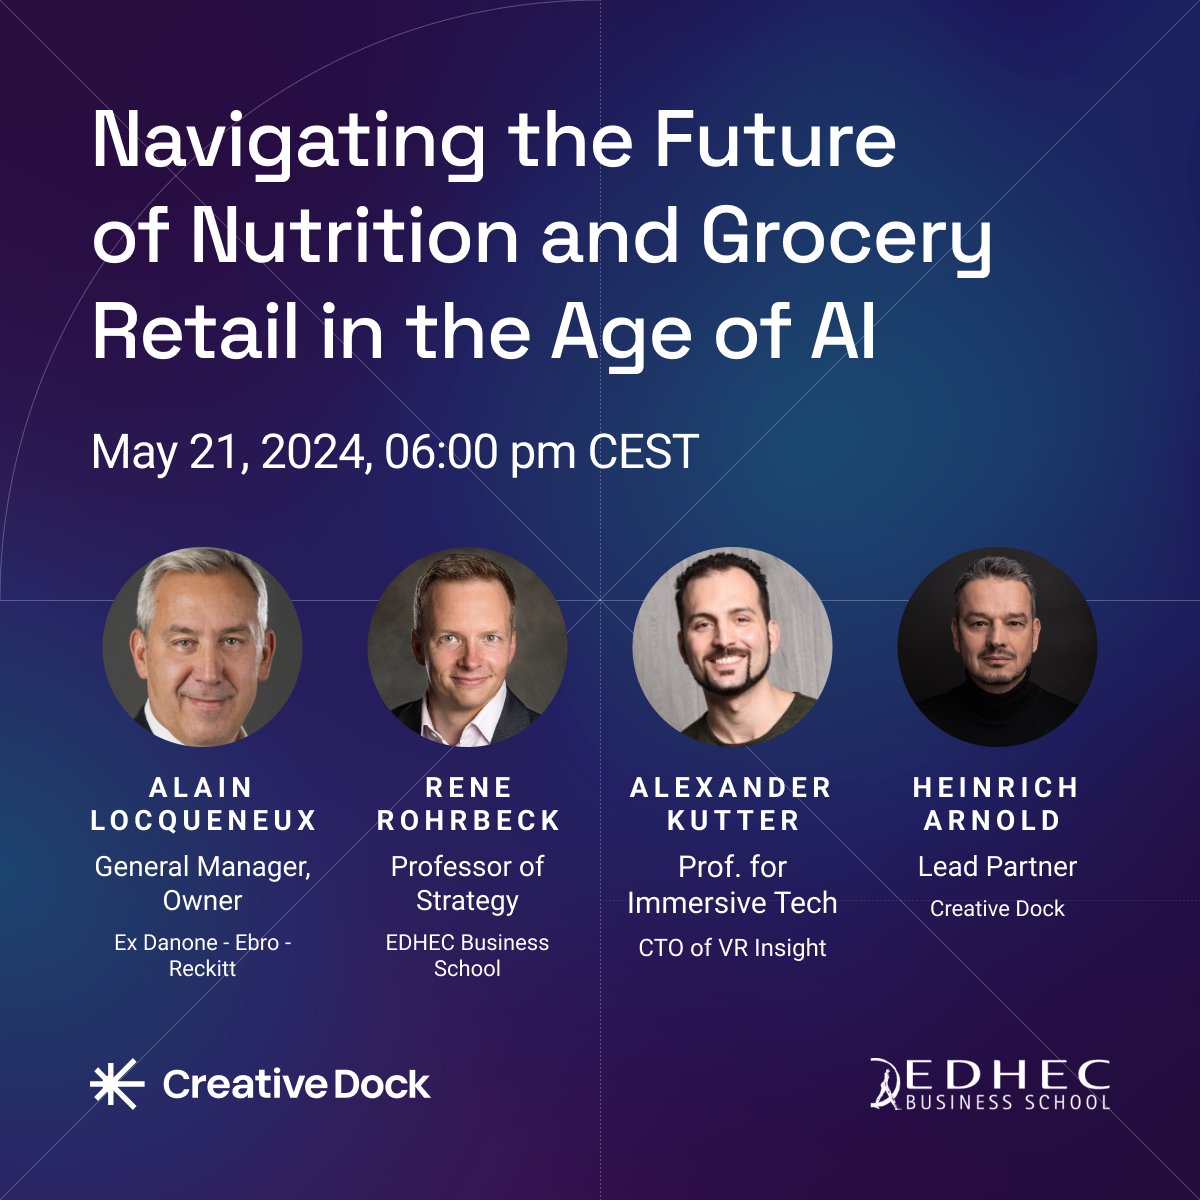 Happy to announce our exclusive online event with @CreativeDockCZ on May 21st! Join us as we explore 'Navigating the Future of Nutrition and Grocery Retail in the Age of AI'. Check out the agenda here: eventbrite.de/e/navigating-t… @EDHEC_BSchool #FutureofRetail #Innovation #webinar